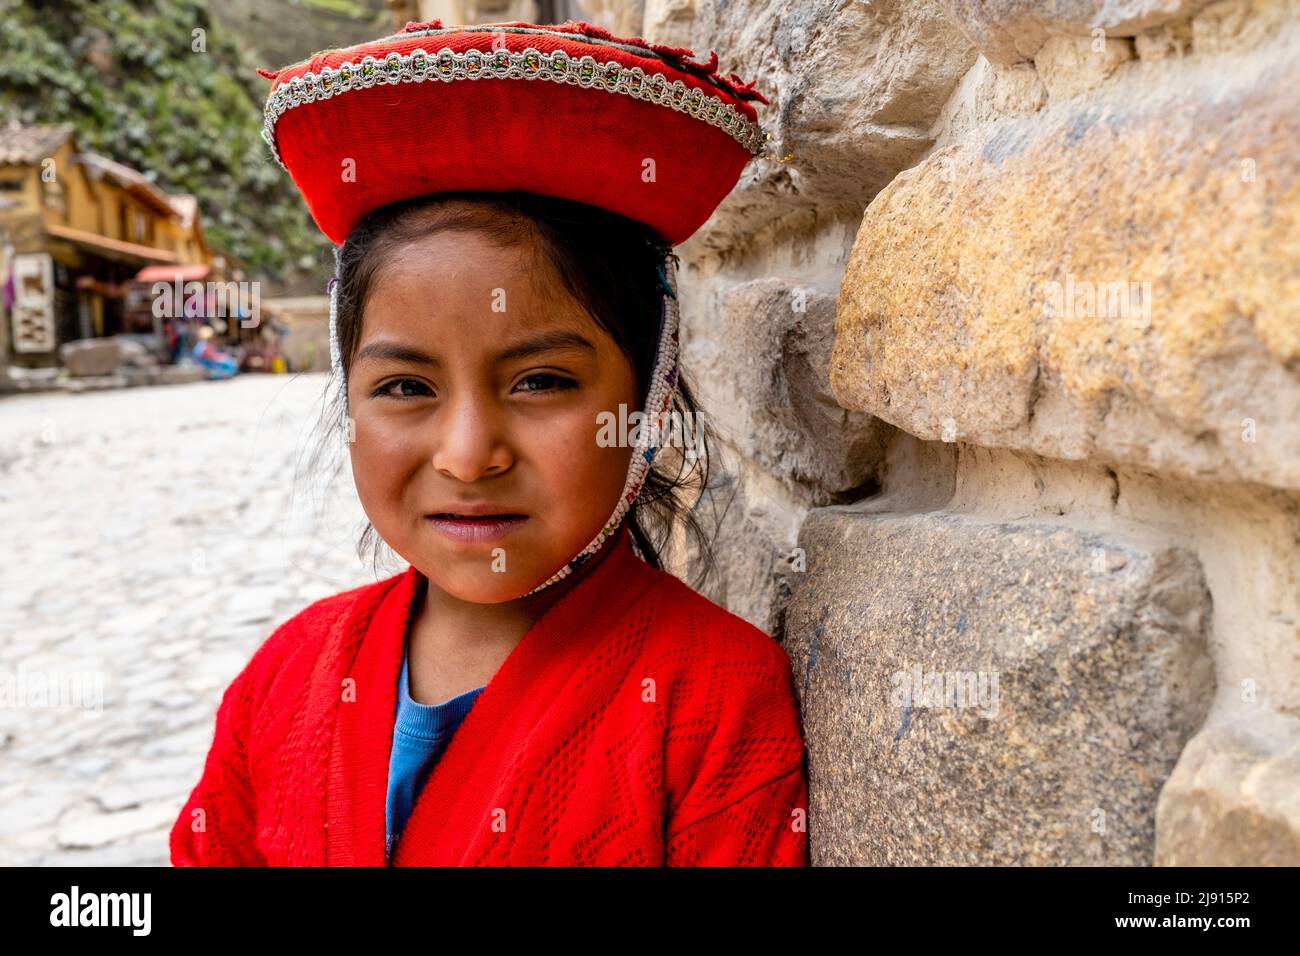 An Indigenous Girl In Traditional Costume Outside The Ollantaytambo Archaeological Site, Ollantaytambo, The Sacred Valley, Cusco Region, Peru. Stock Photo